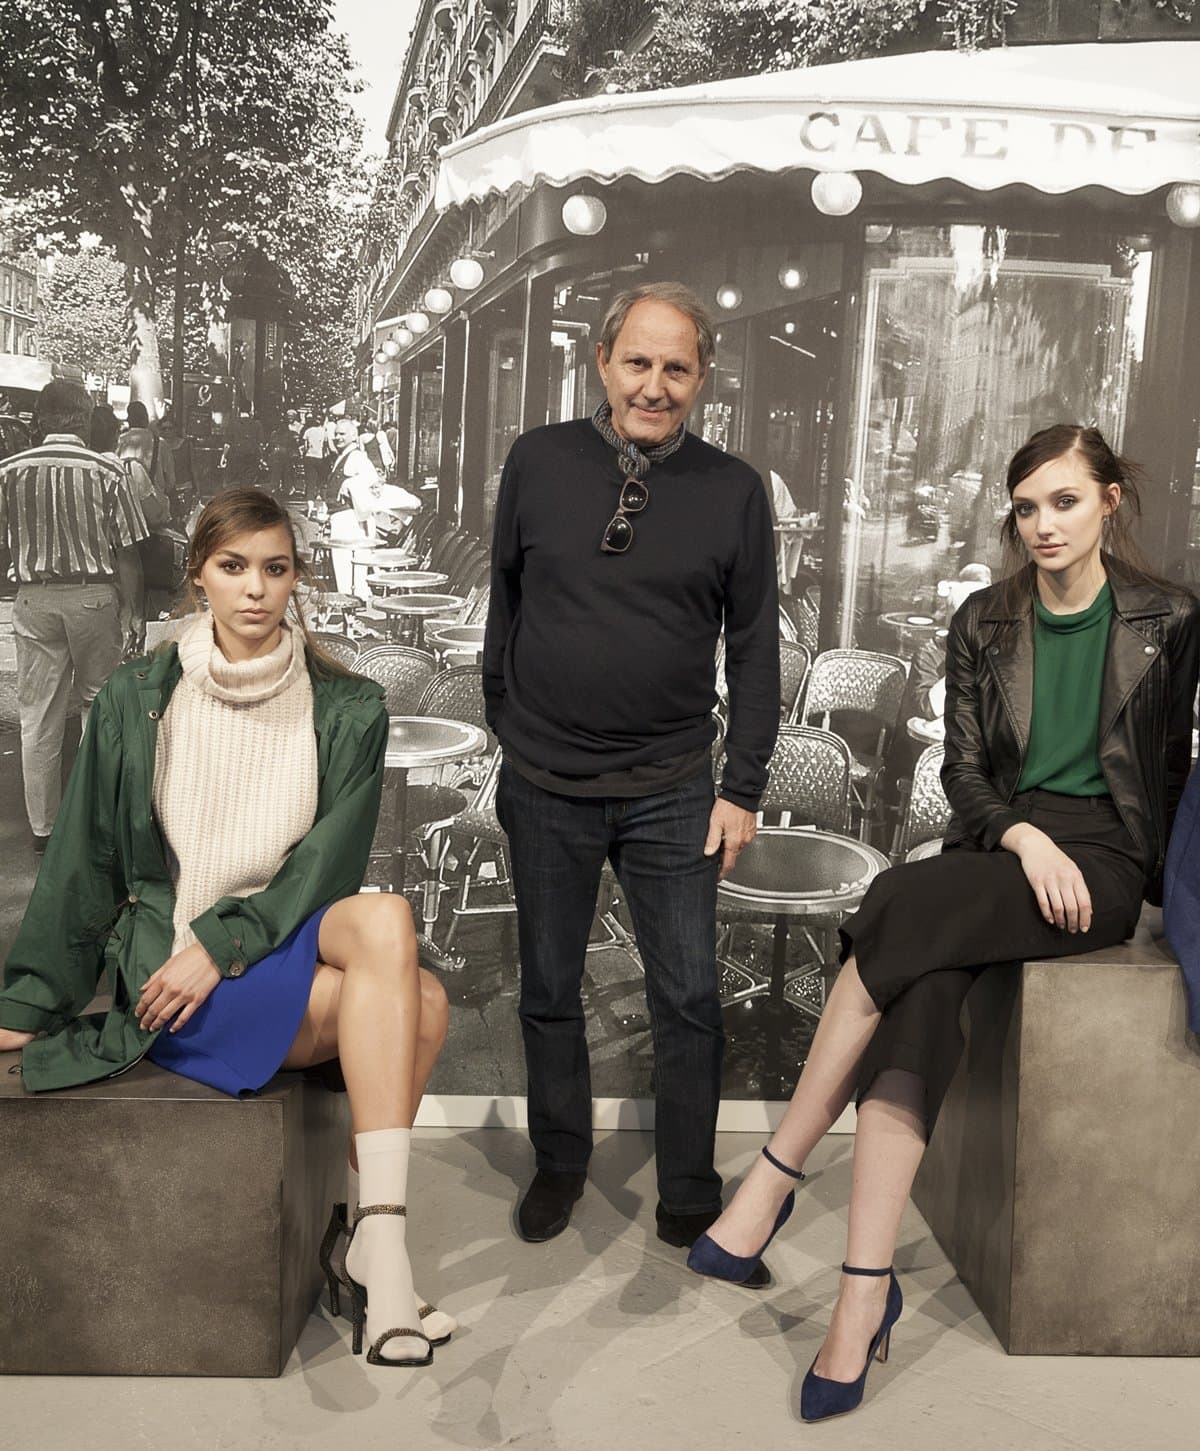 Joie's founder Serge Azria poses with models at the Joie presentation during Mercedes-Benz Fashion Week Fall 2014